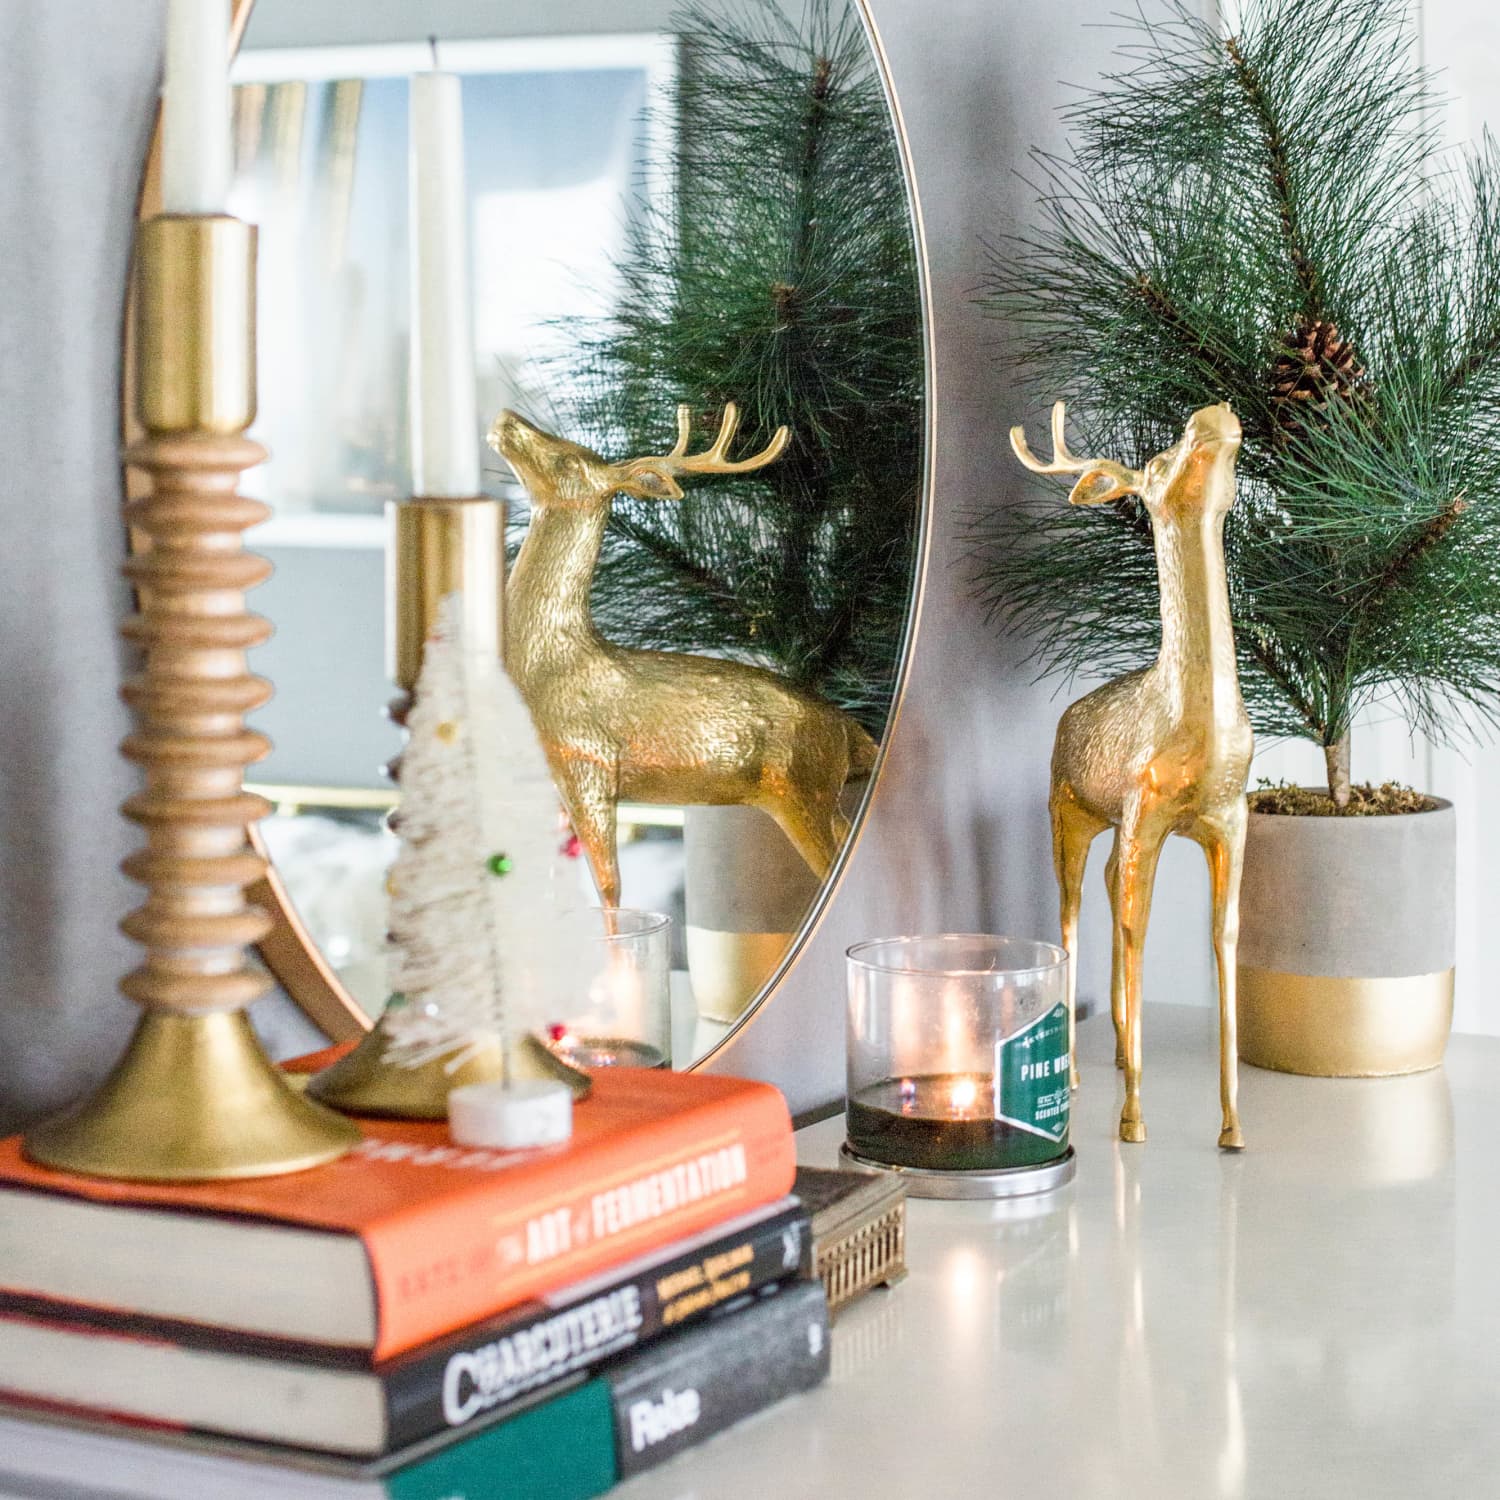 24 Christmas Wall Decor Ideas to Try This Holiday Season